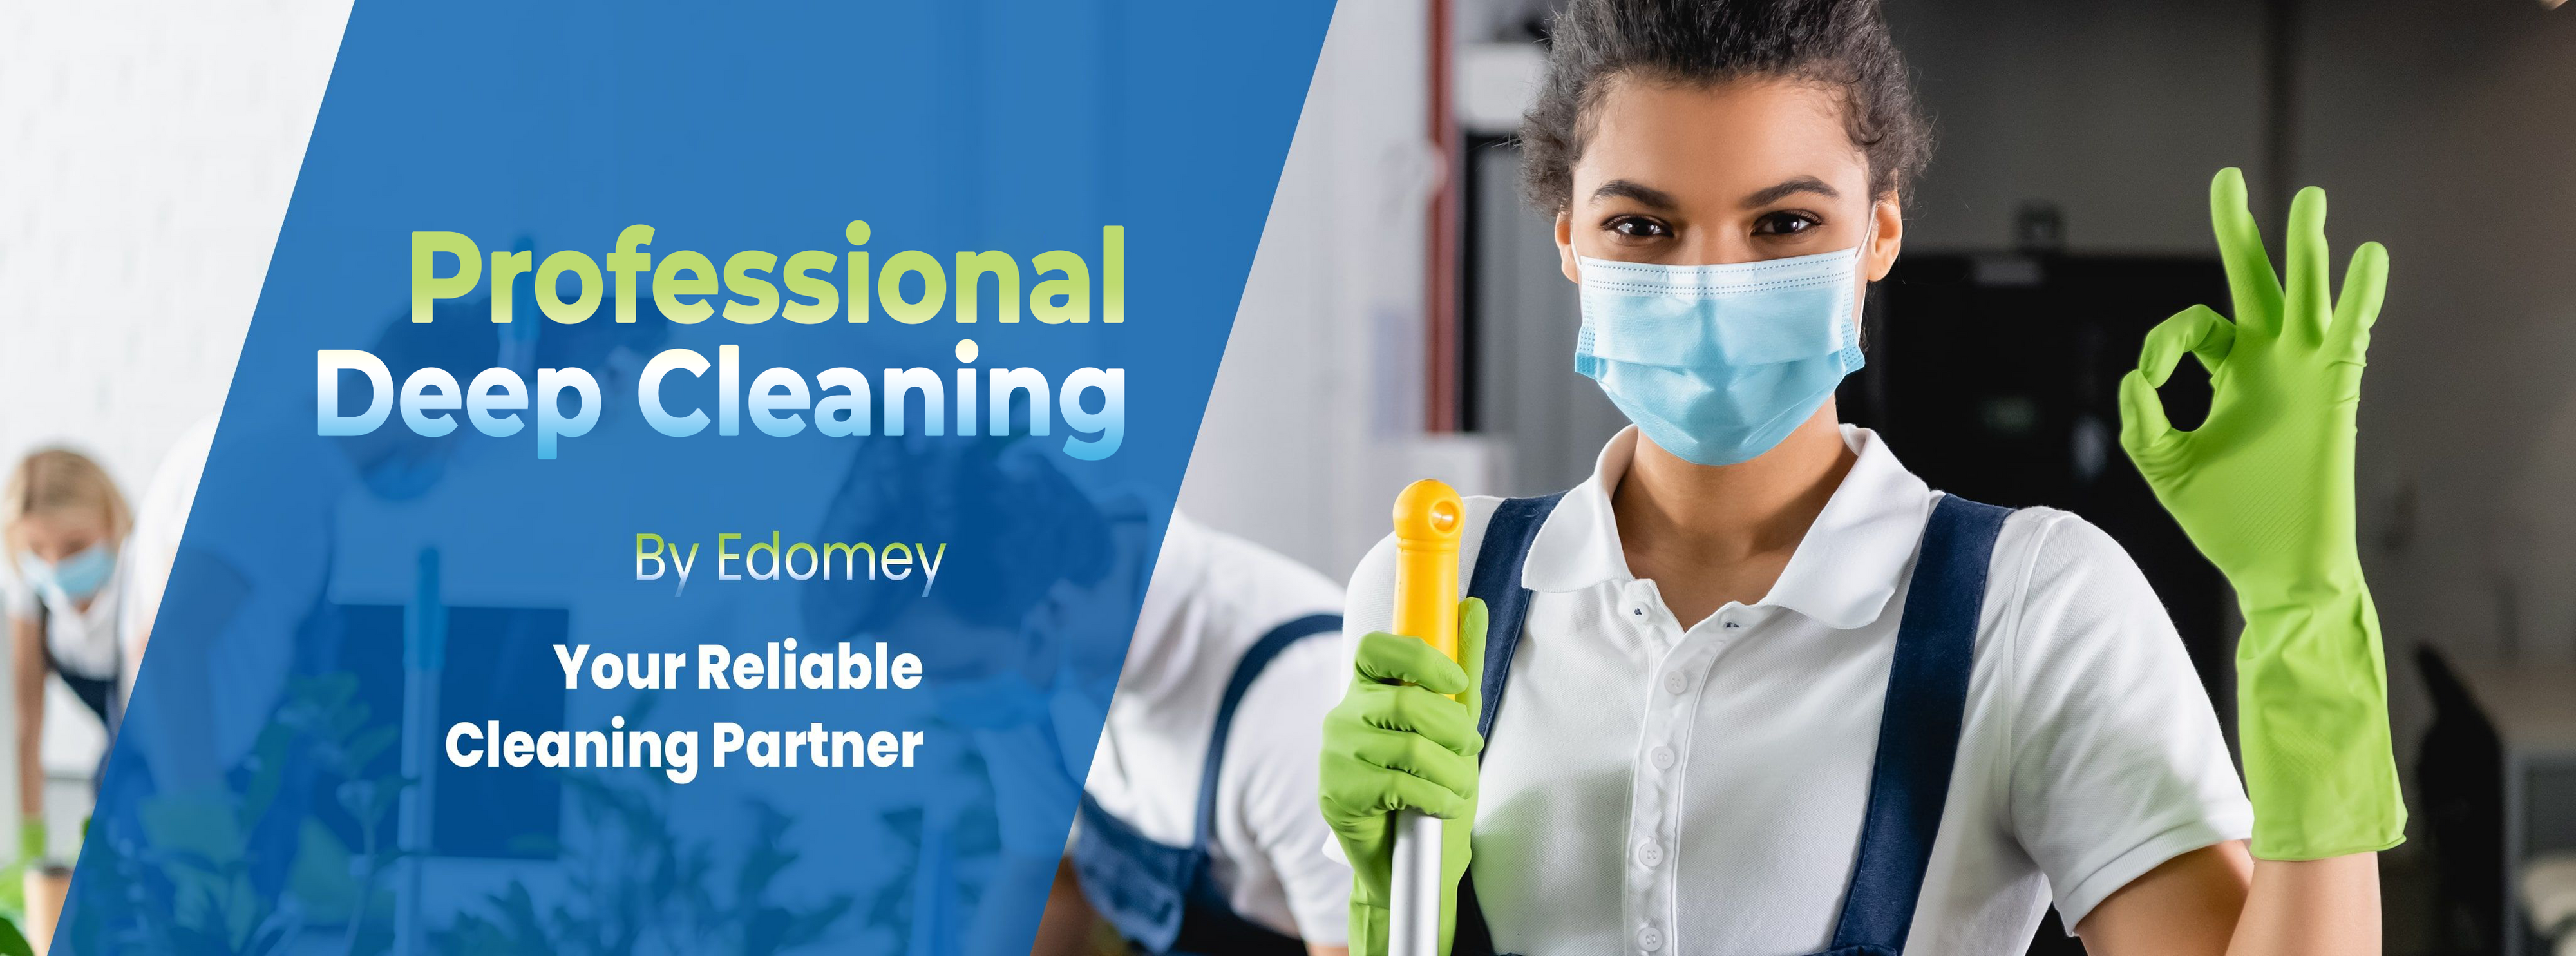 commercial cleaning servicesjanitorial cleaning services (2).png